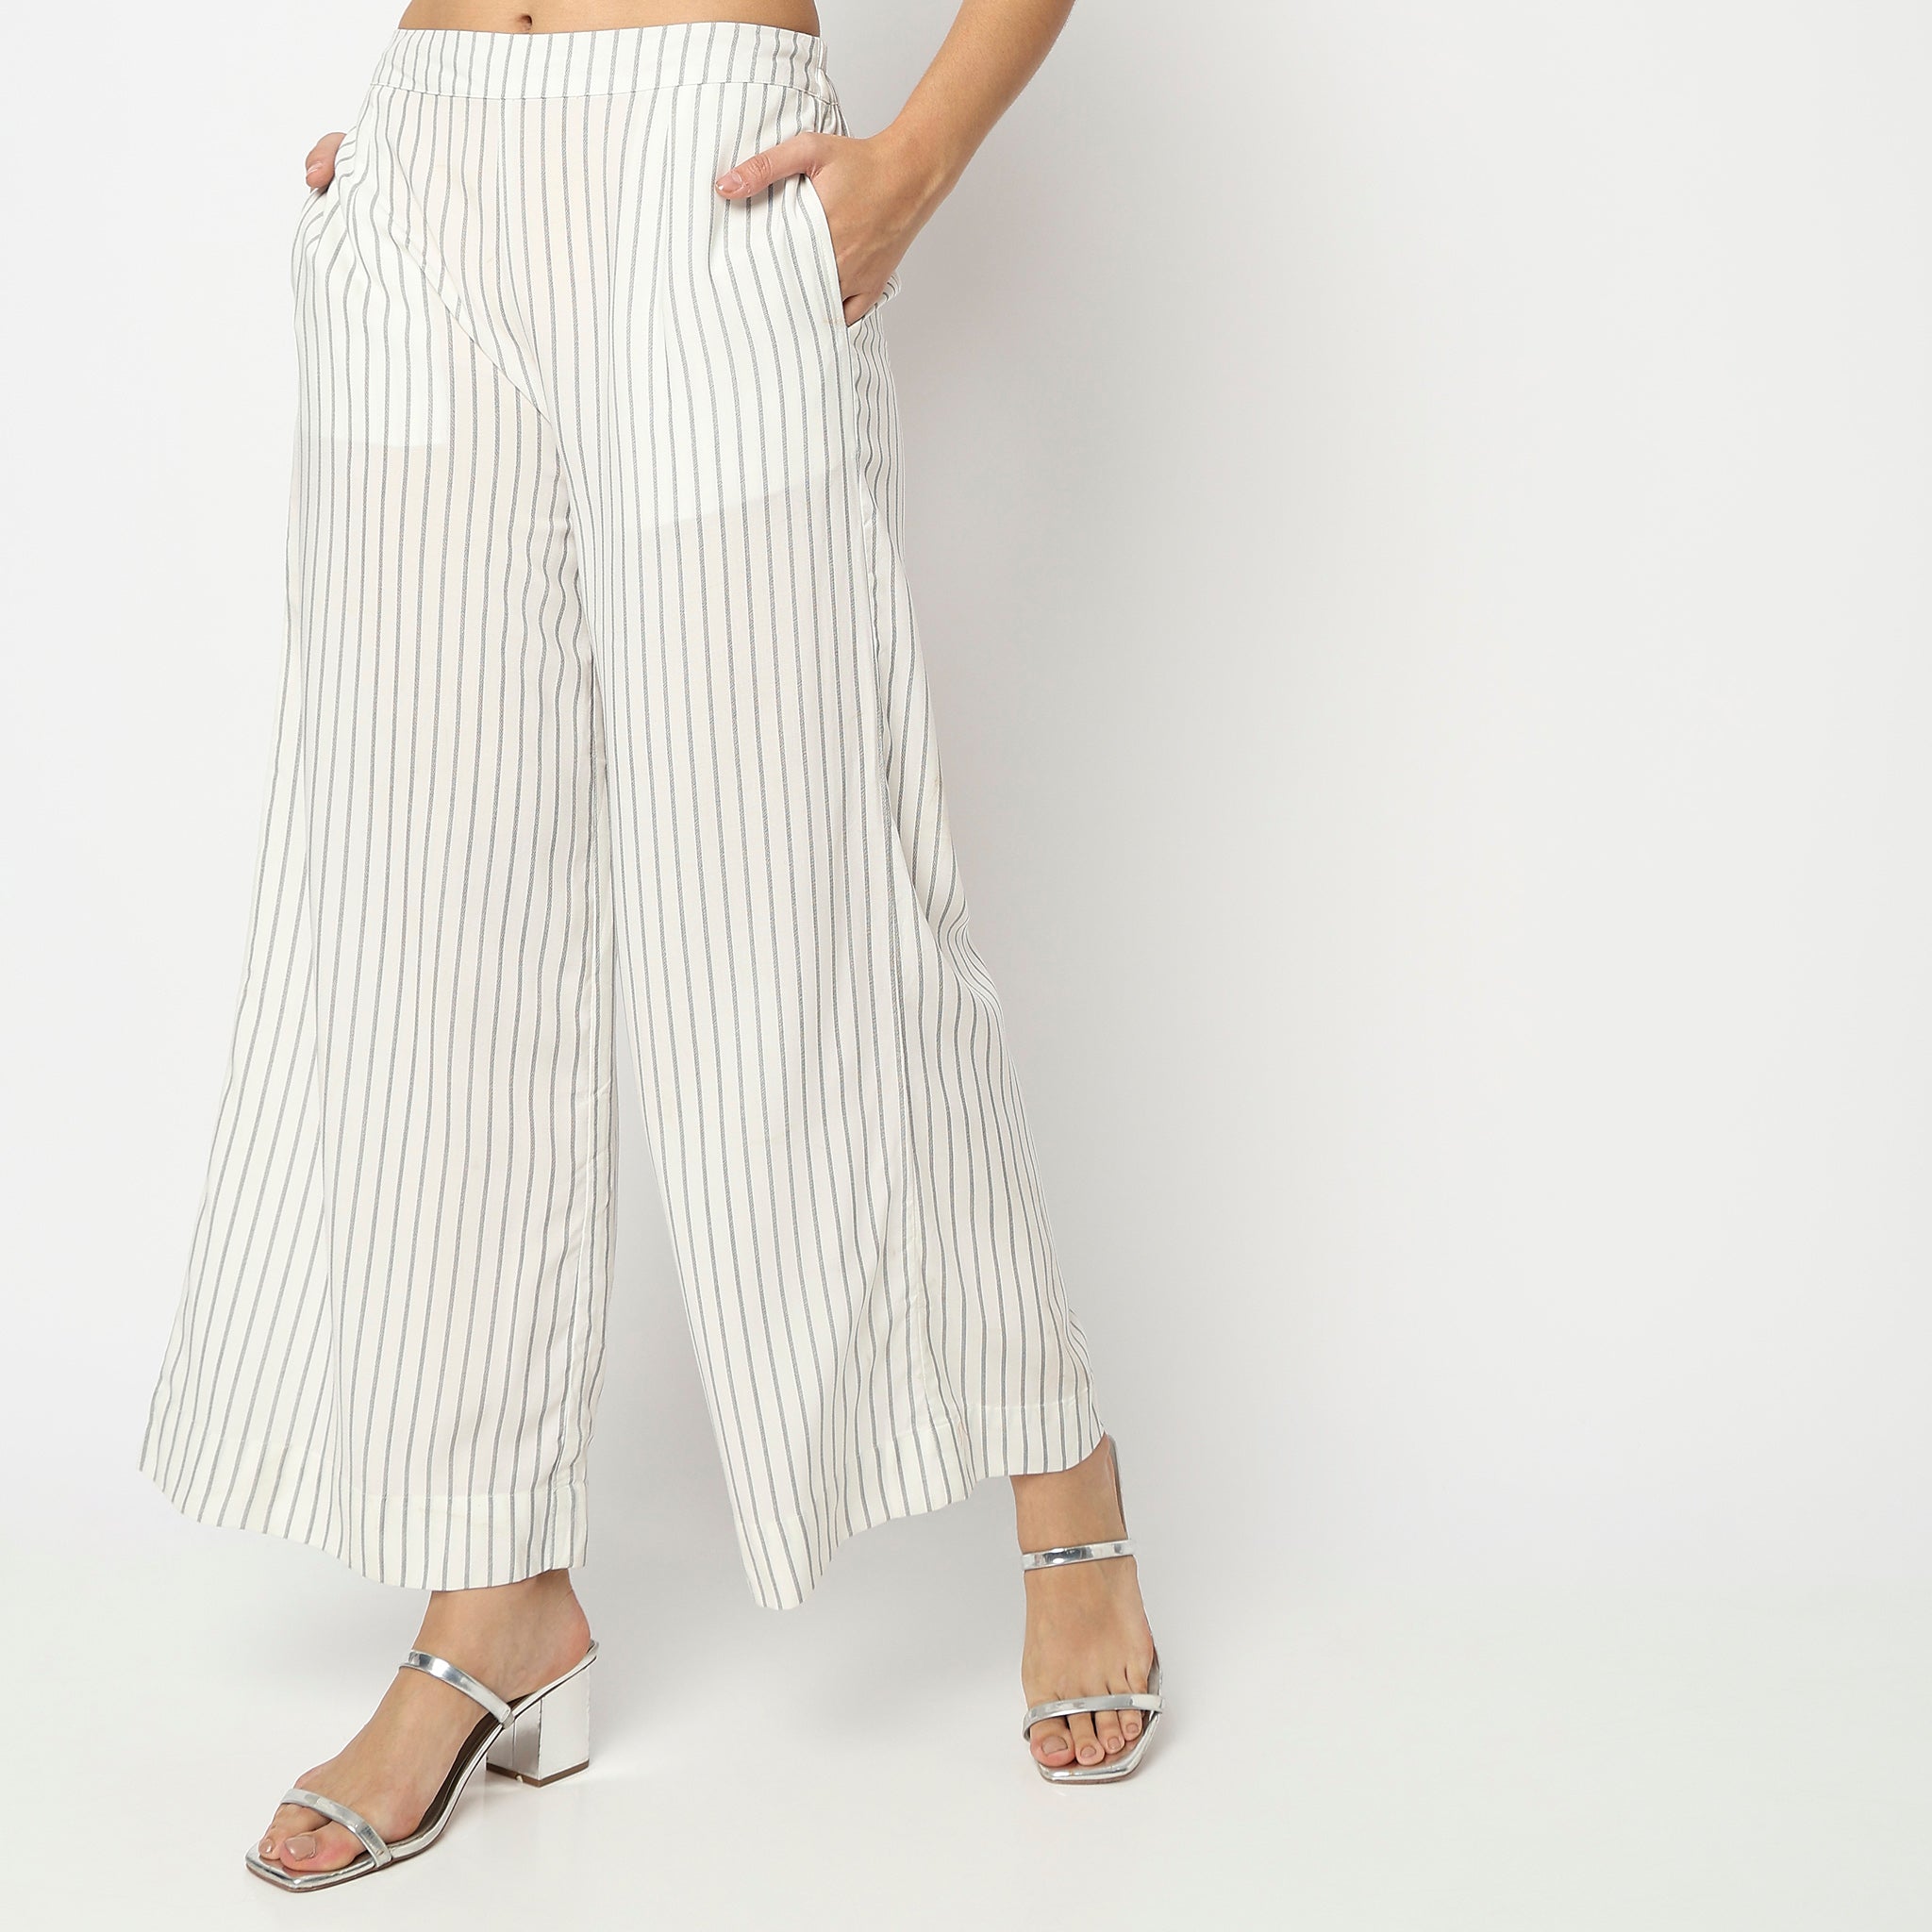 Women Wearing Flare Fit Striped High Rise Palazzo